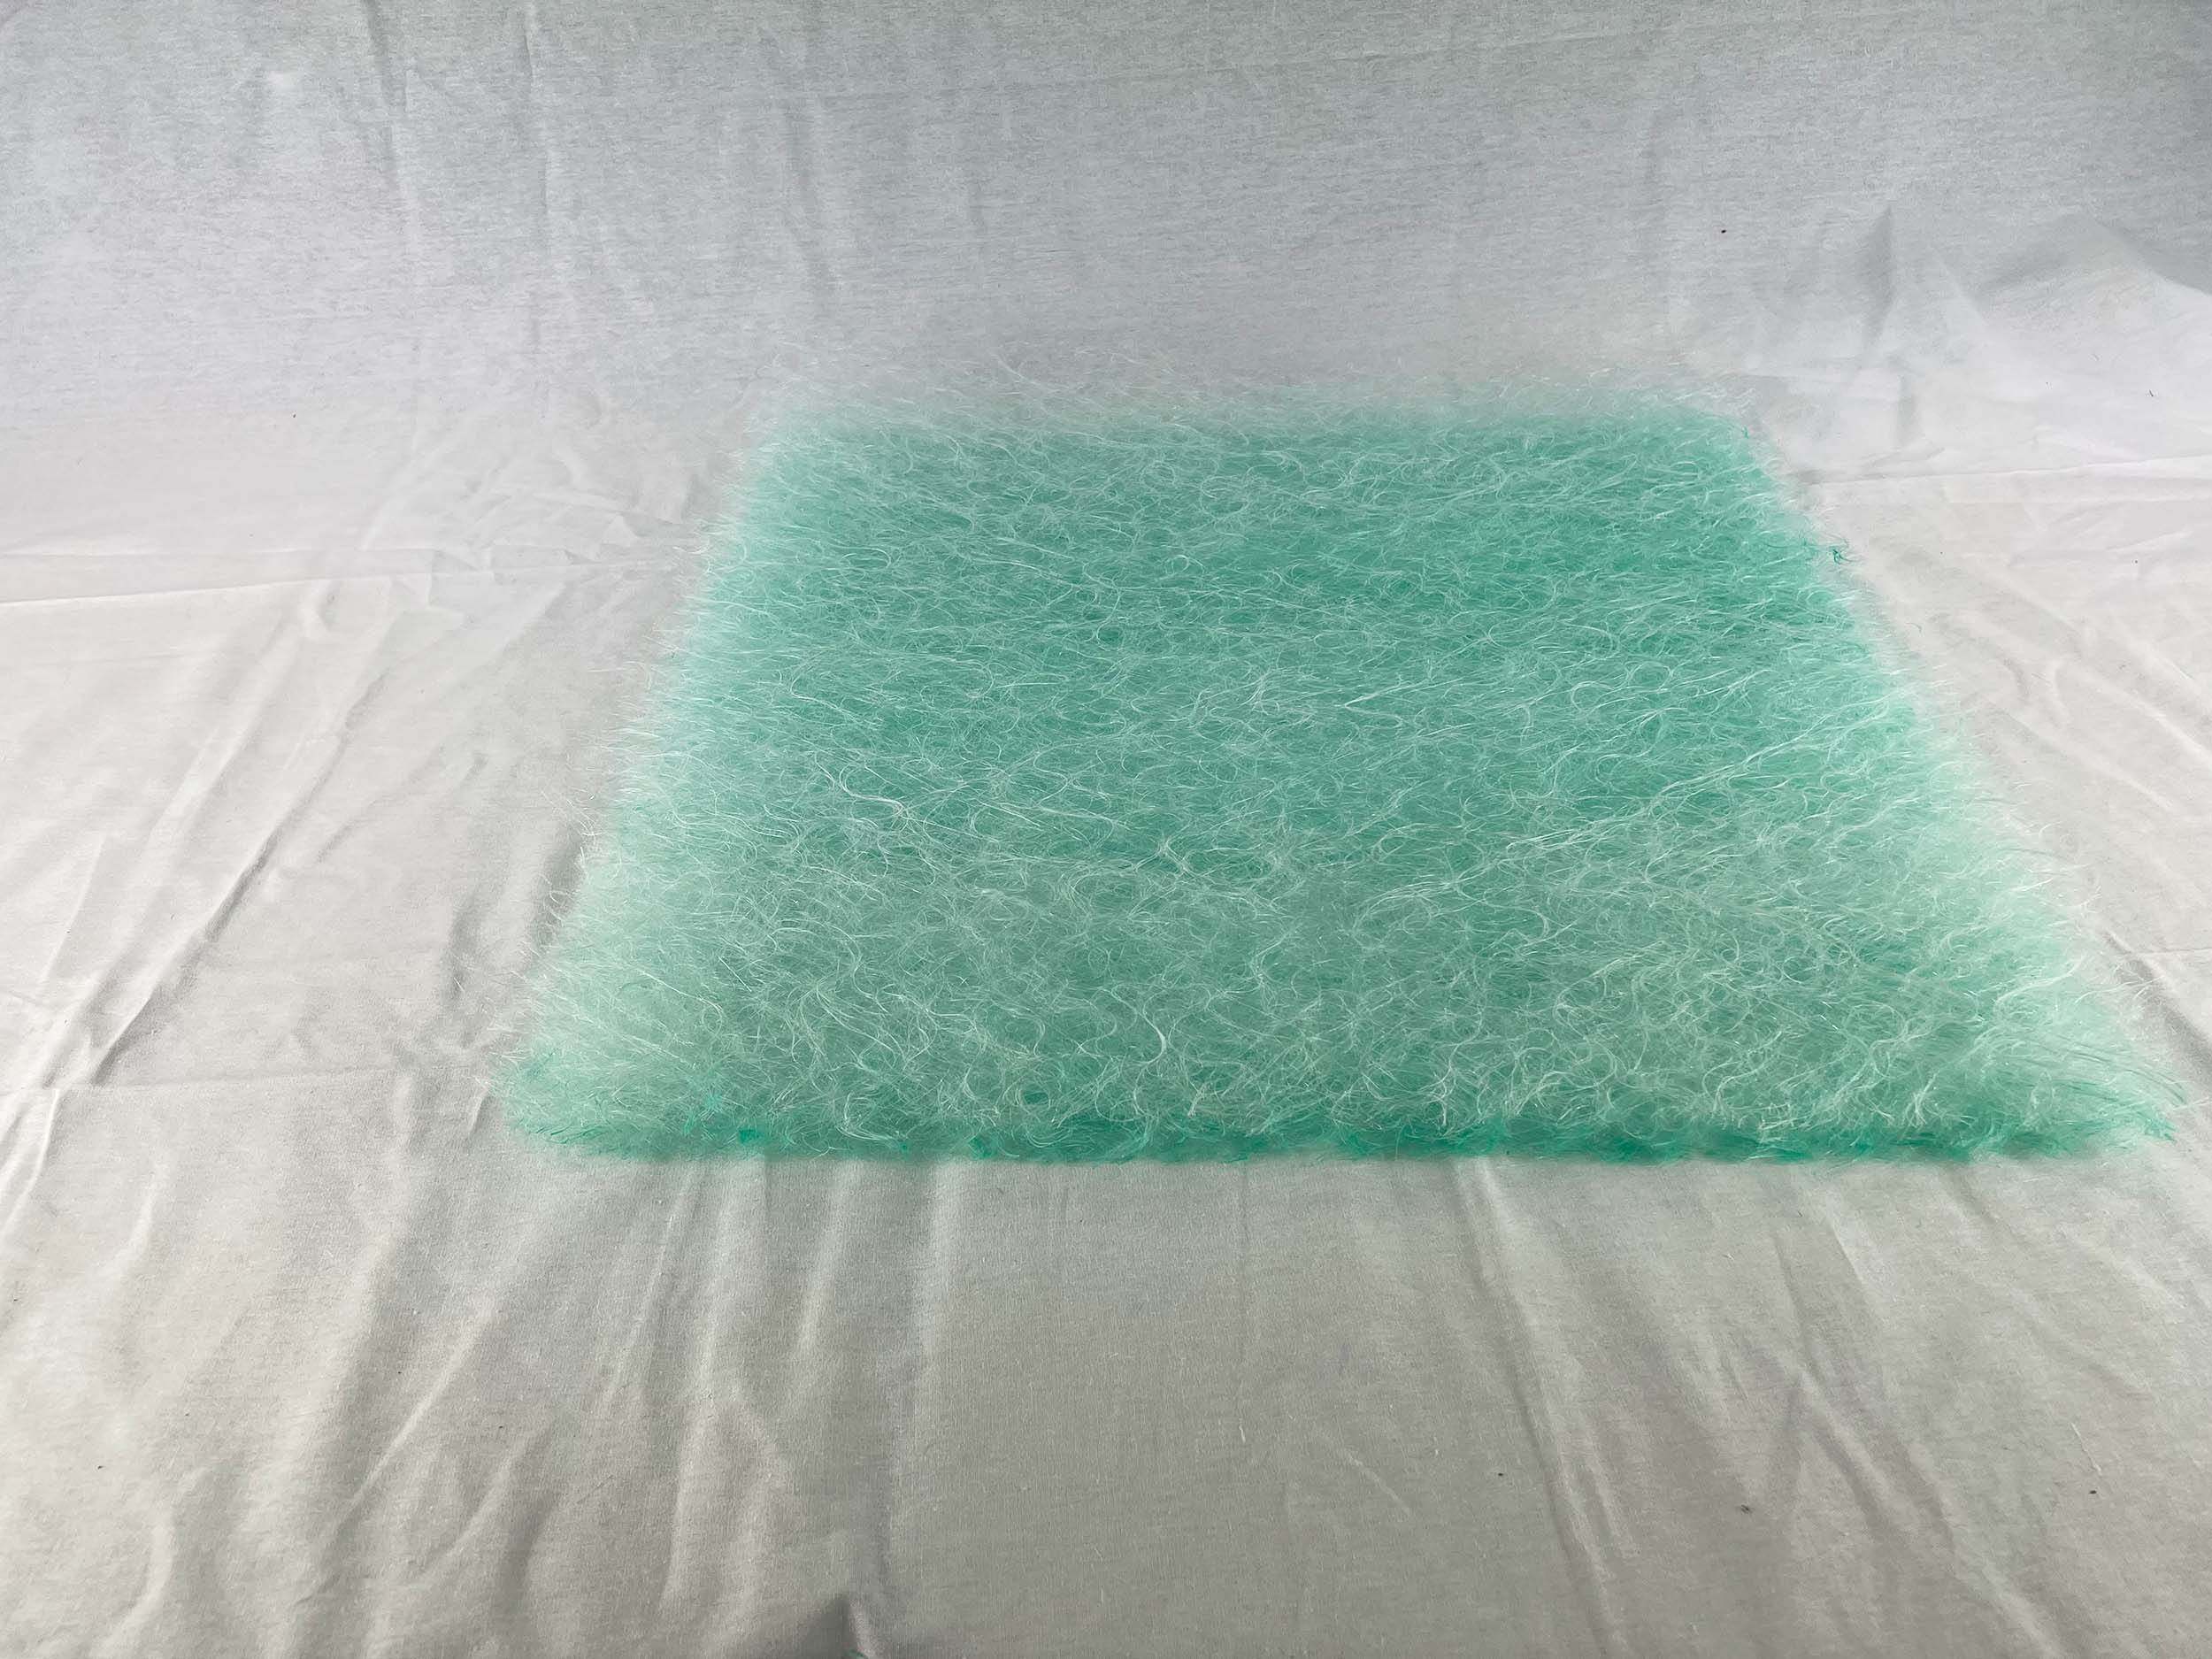 Paint Booth Filter Media Blanket - 100' X 48 - Clip and Spray!